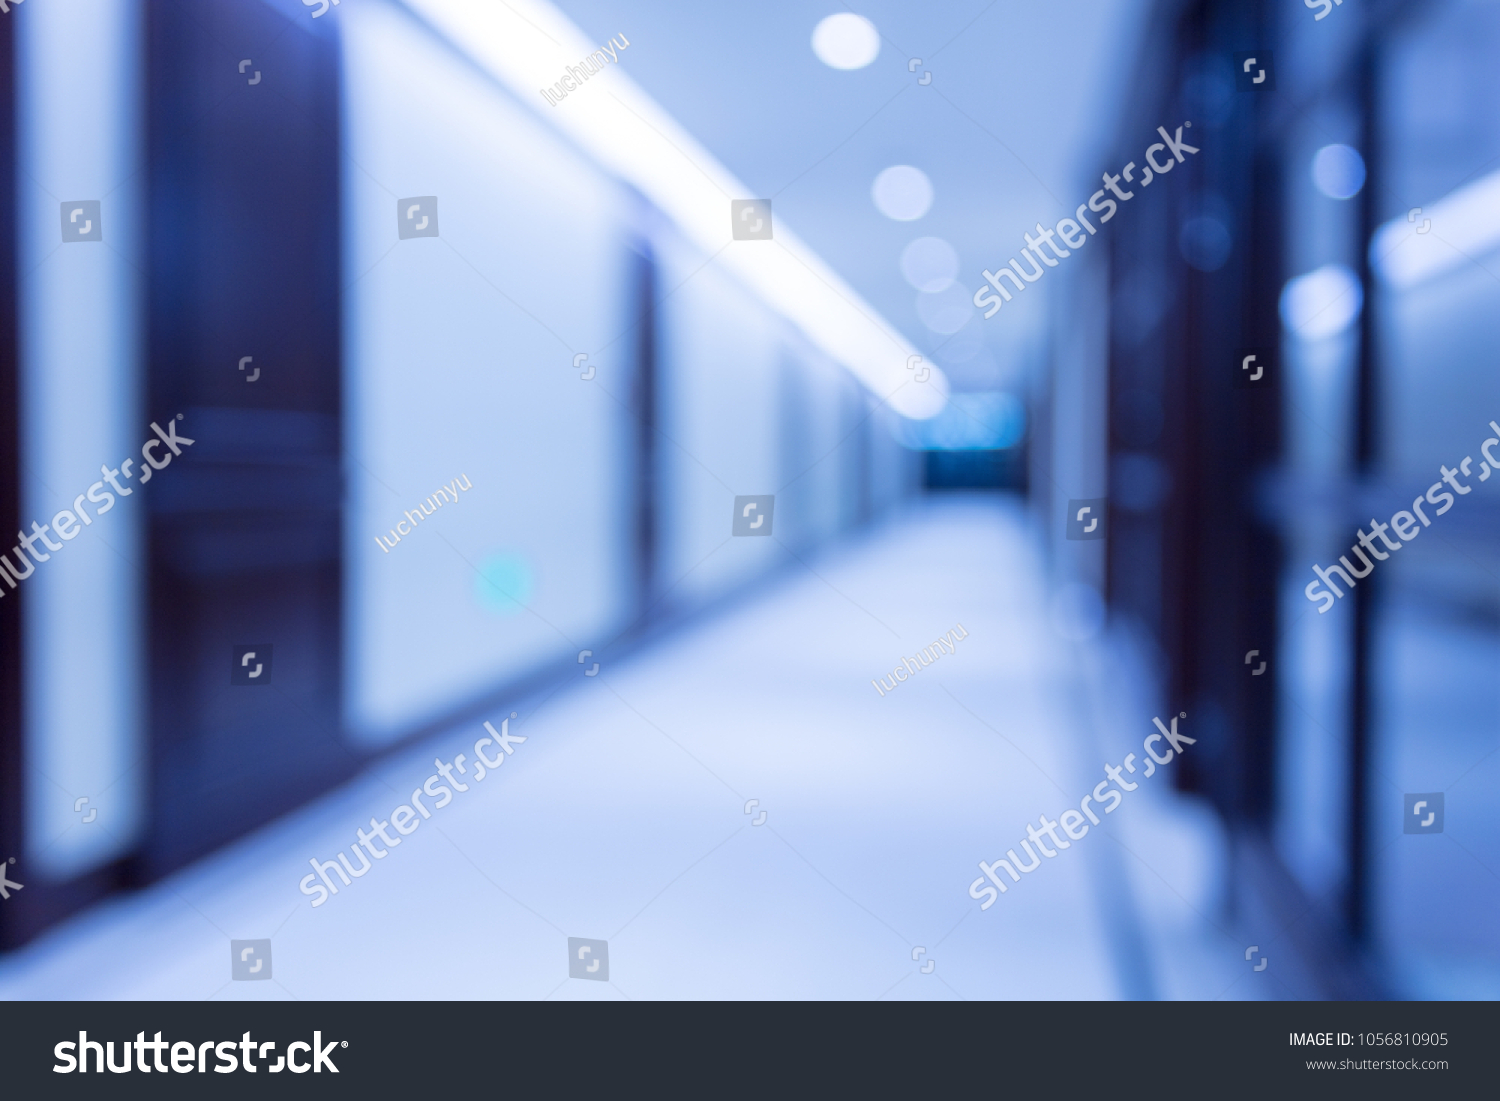 Corridor with blurred background #1056810905